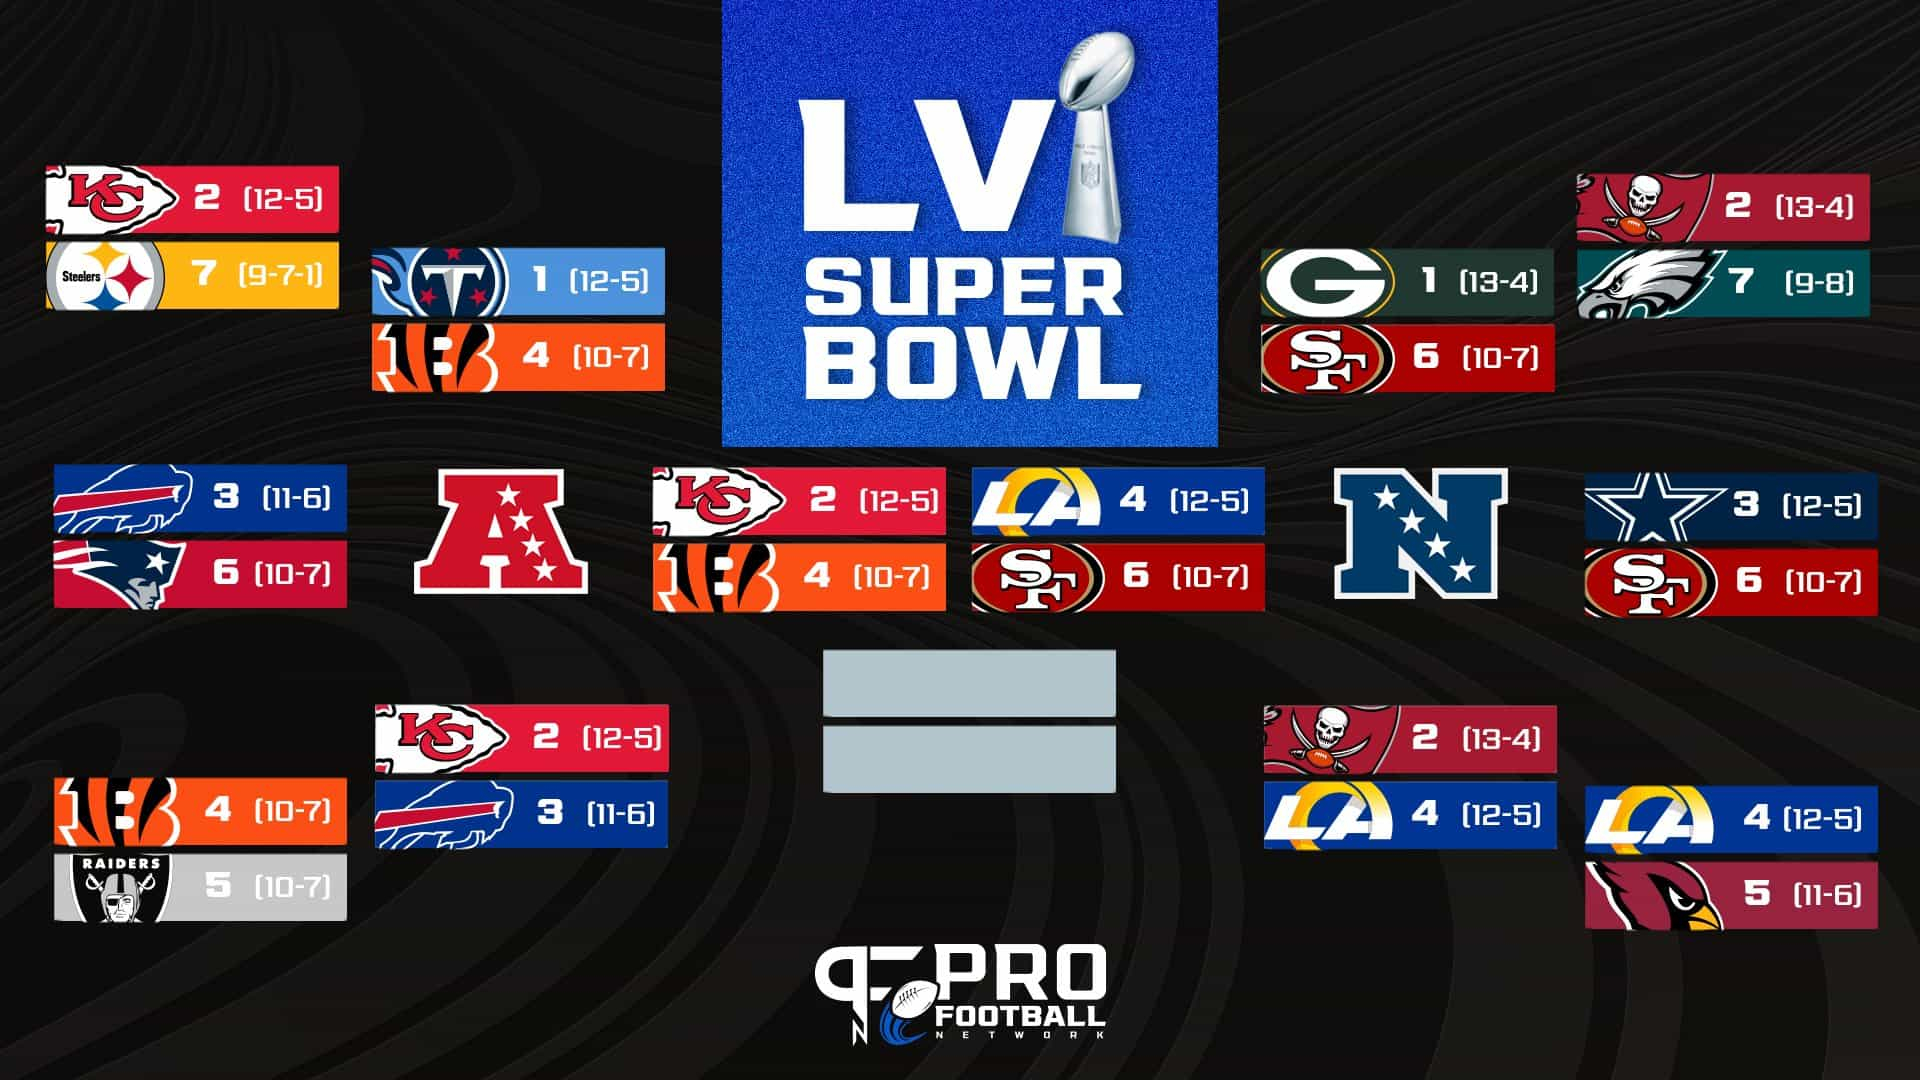 Nfl Playoff Bracket Divisional Round Schedule Matchups For This Weekend Freeprintableme